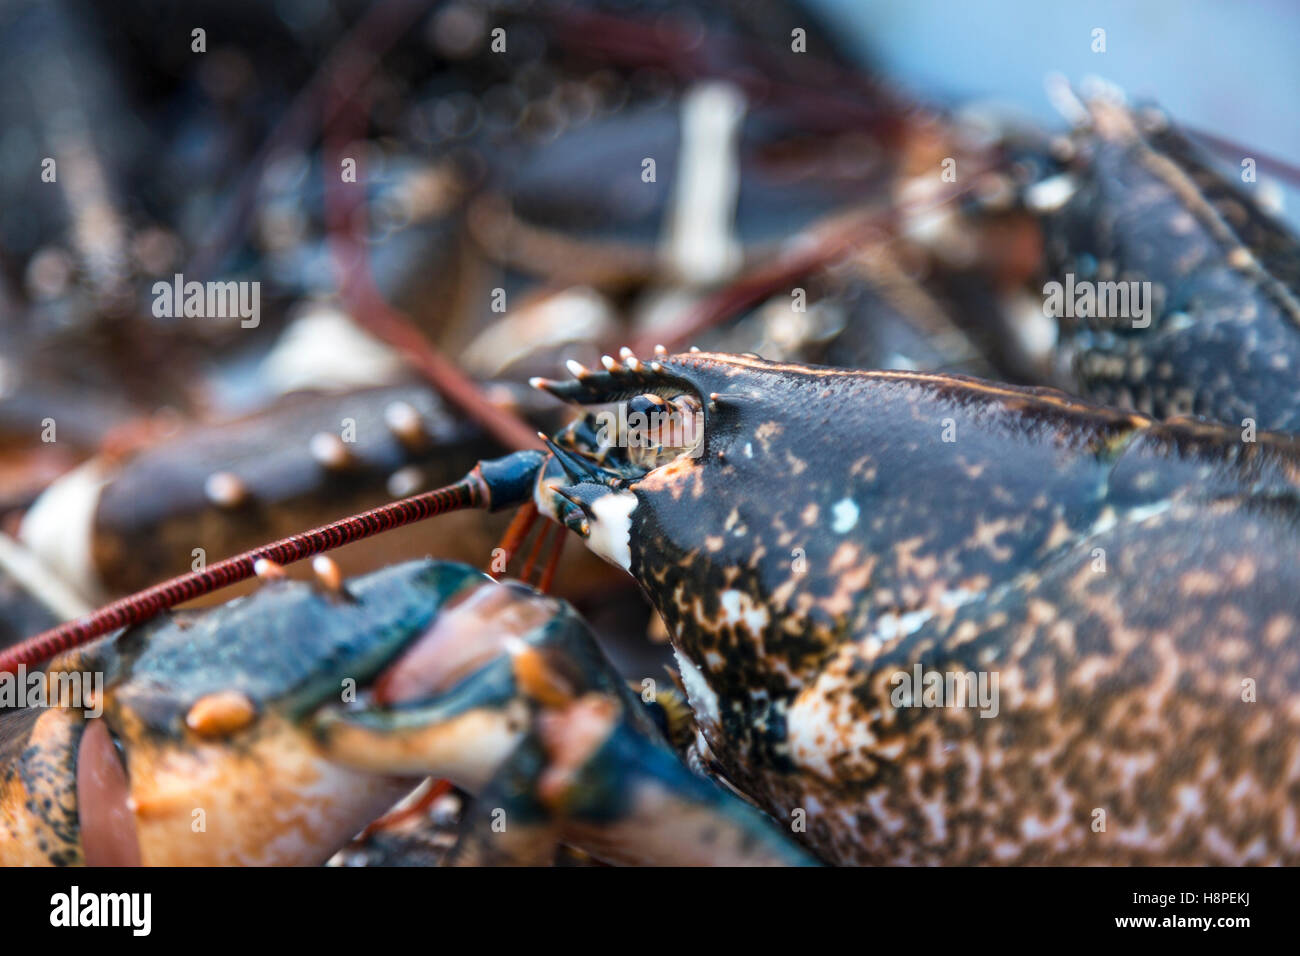 Fresh lobster close-up Stock Photo